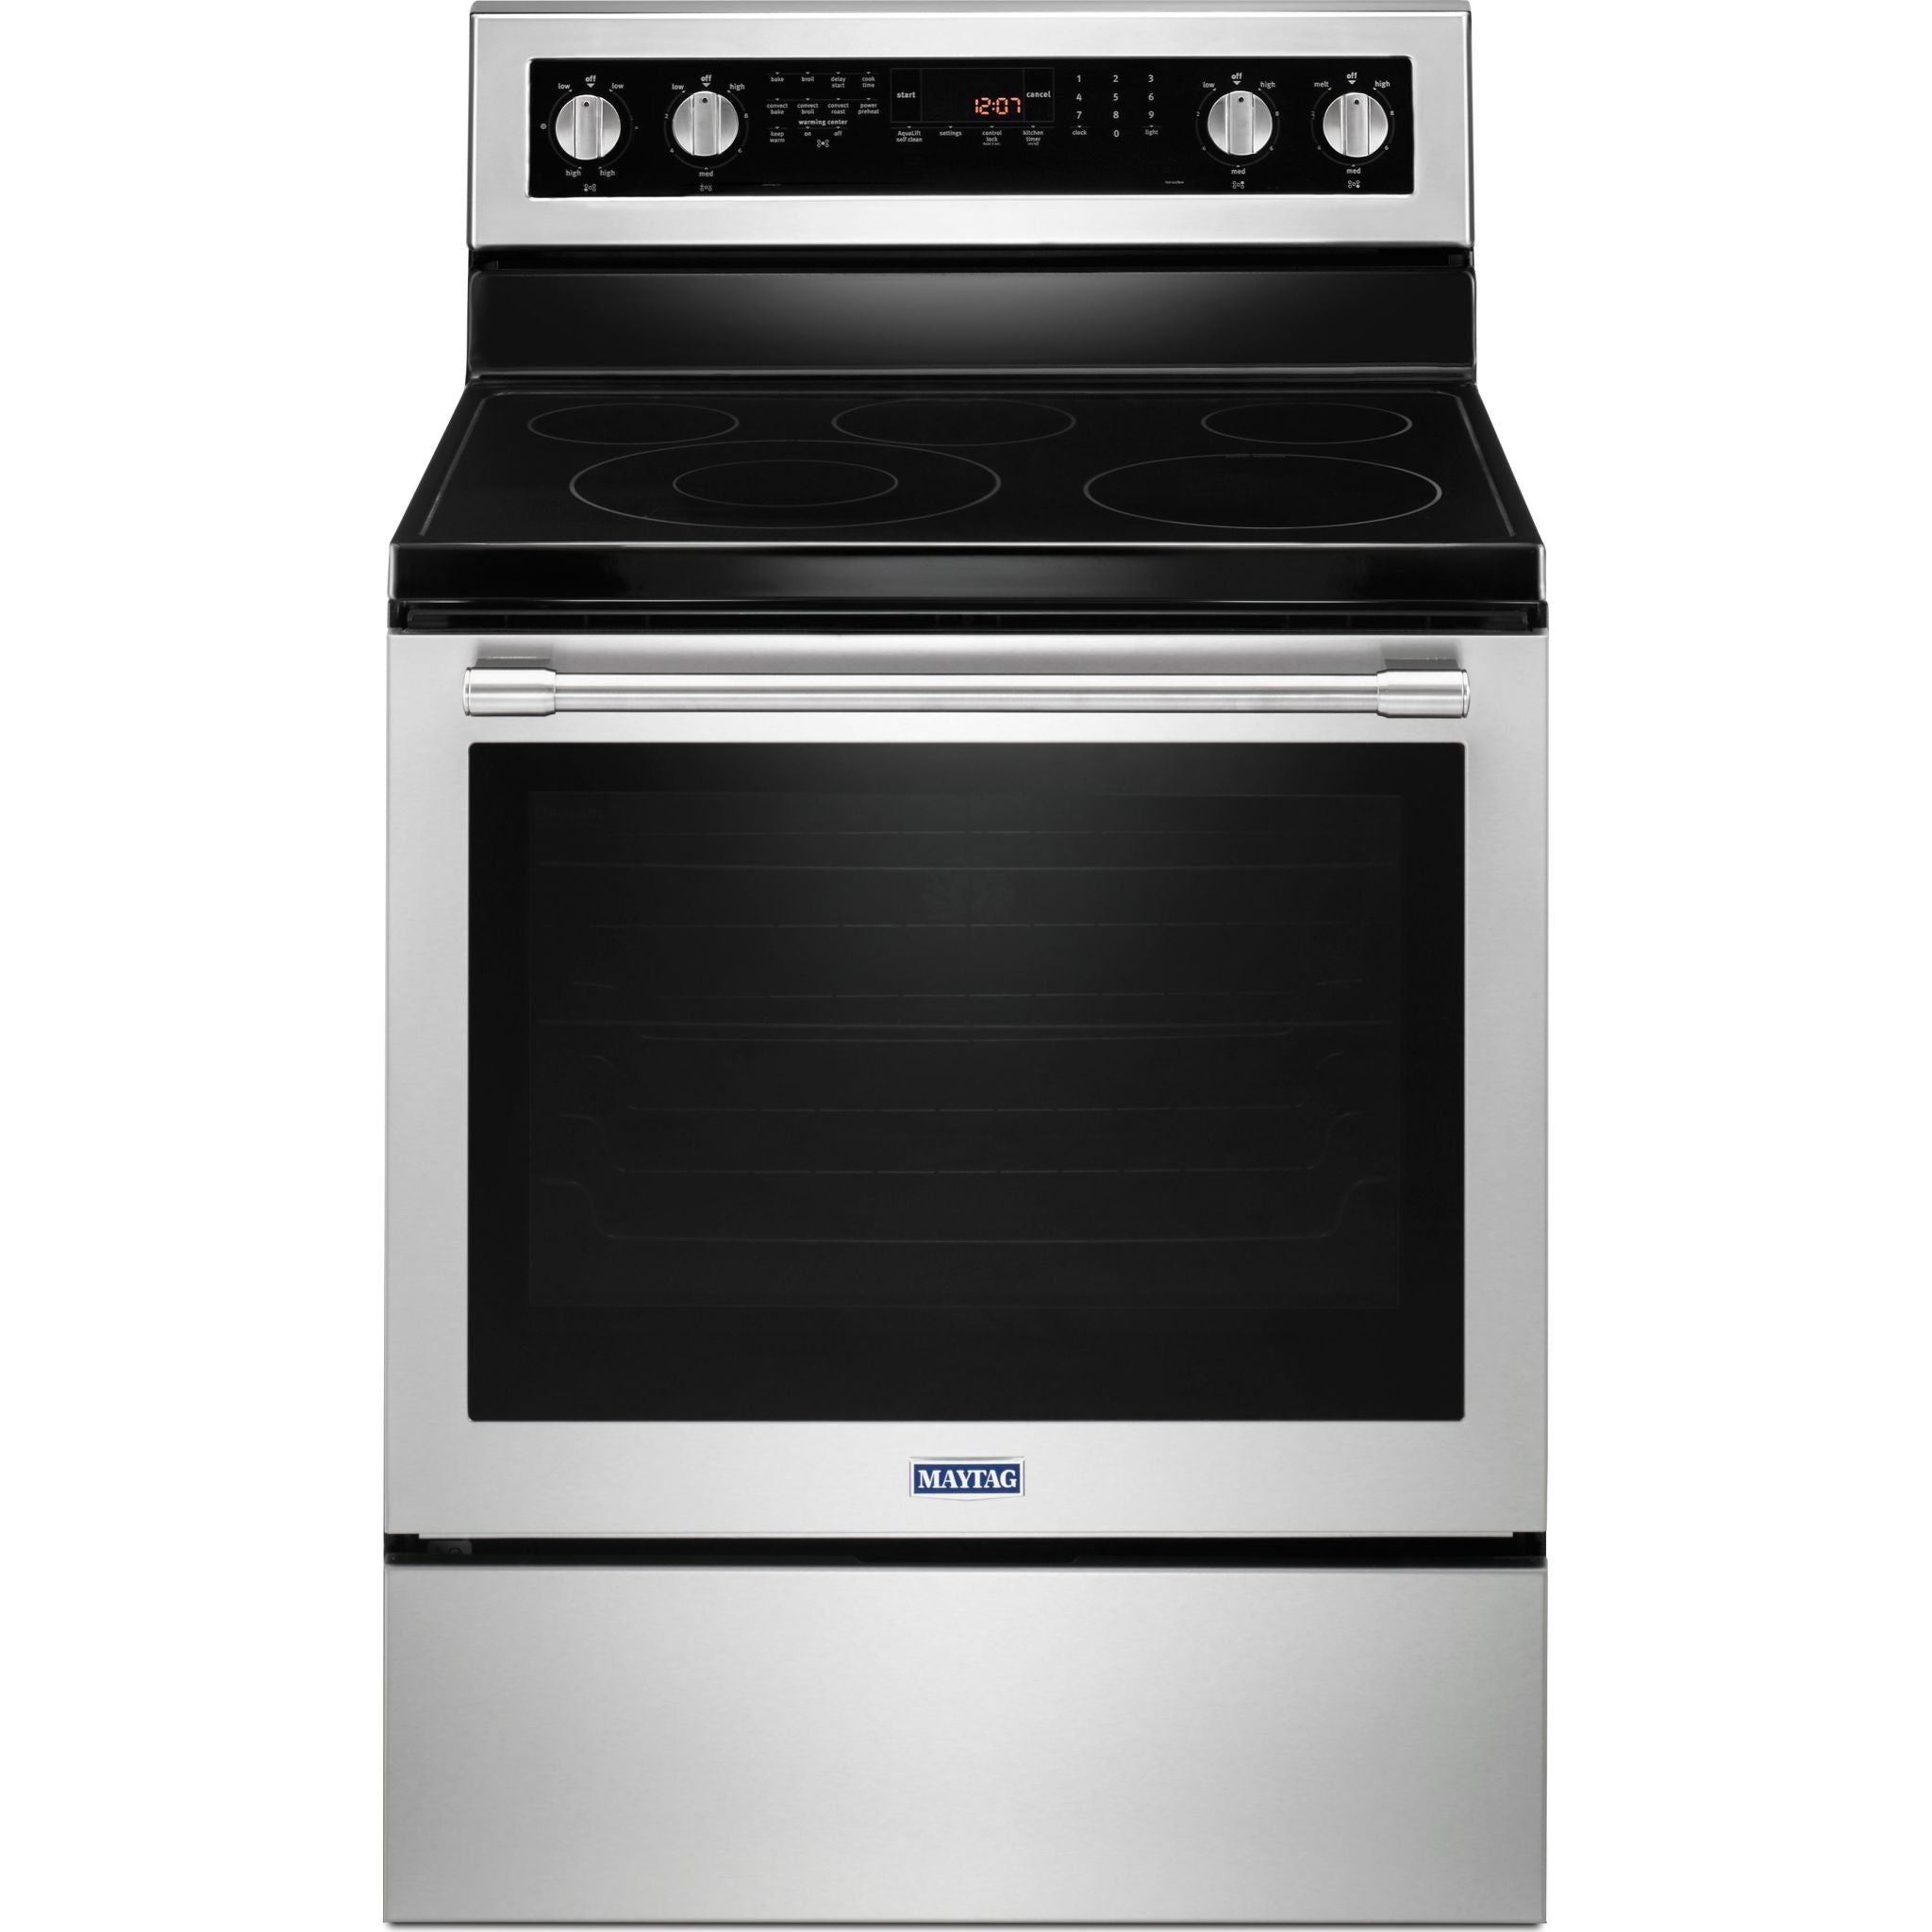 True Convection Range (Ymer8800fz) In Stainless Steel, Size: 28"-30" W By Maytag